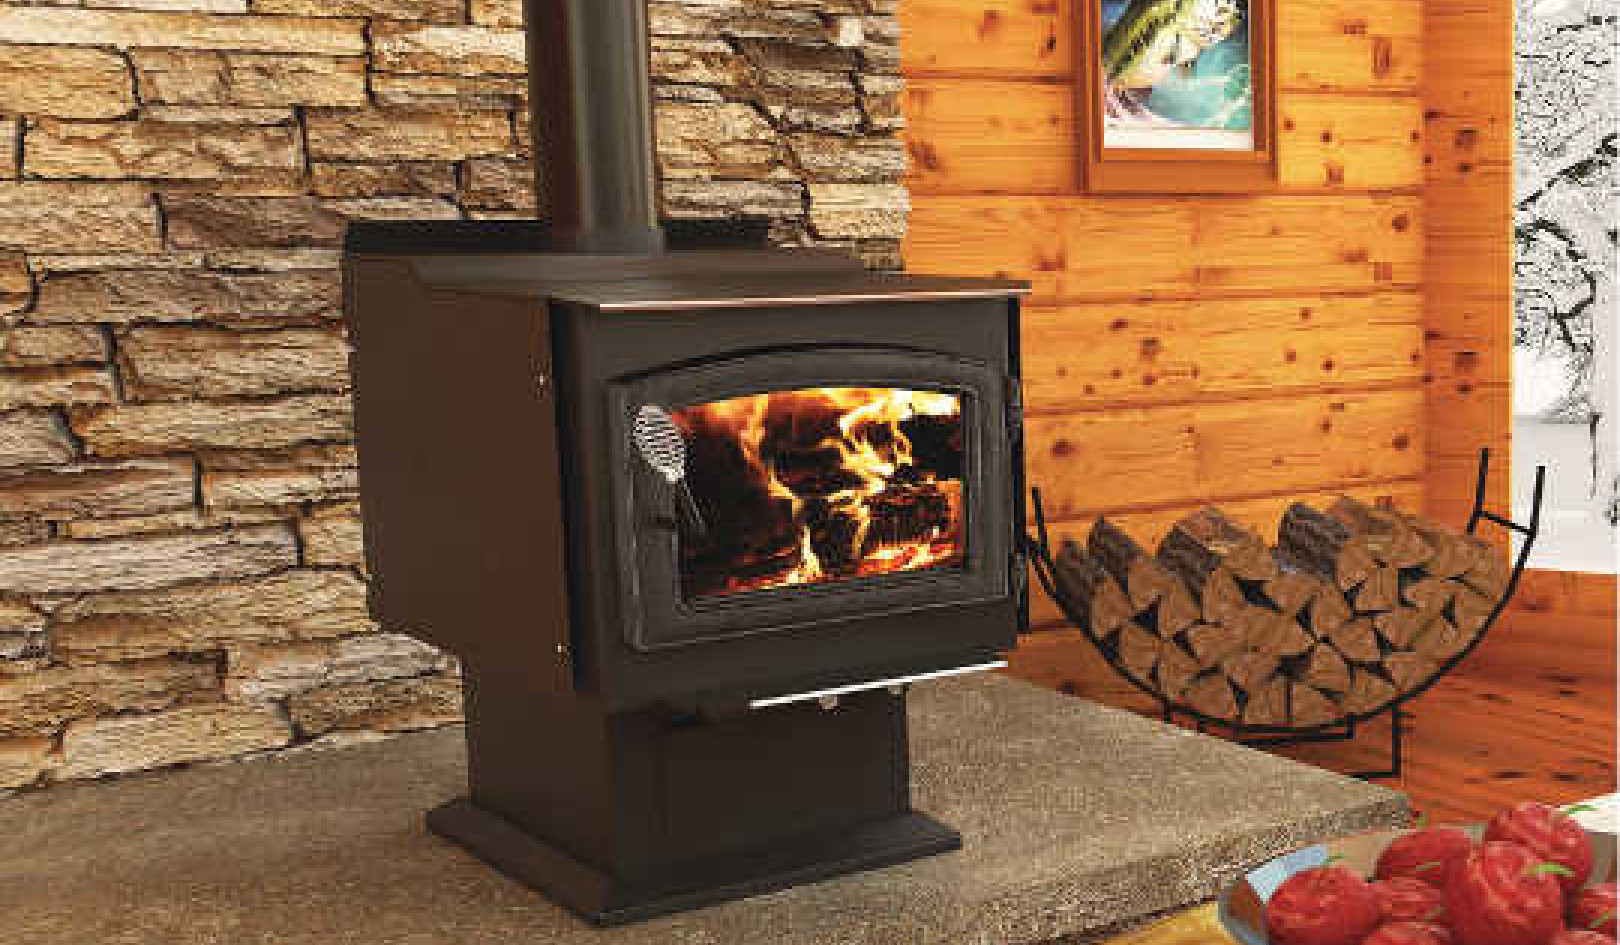 Why Wood-burning Stoves Are Raising Health Concerns